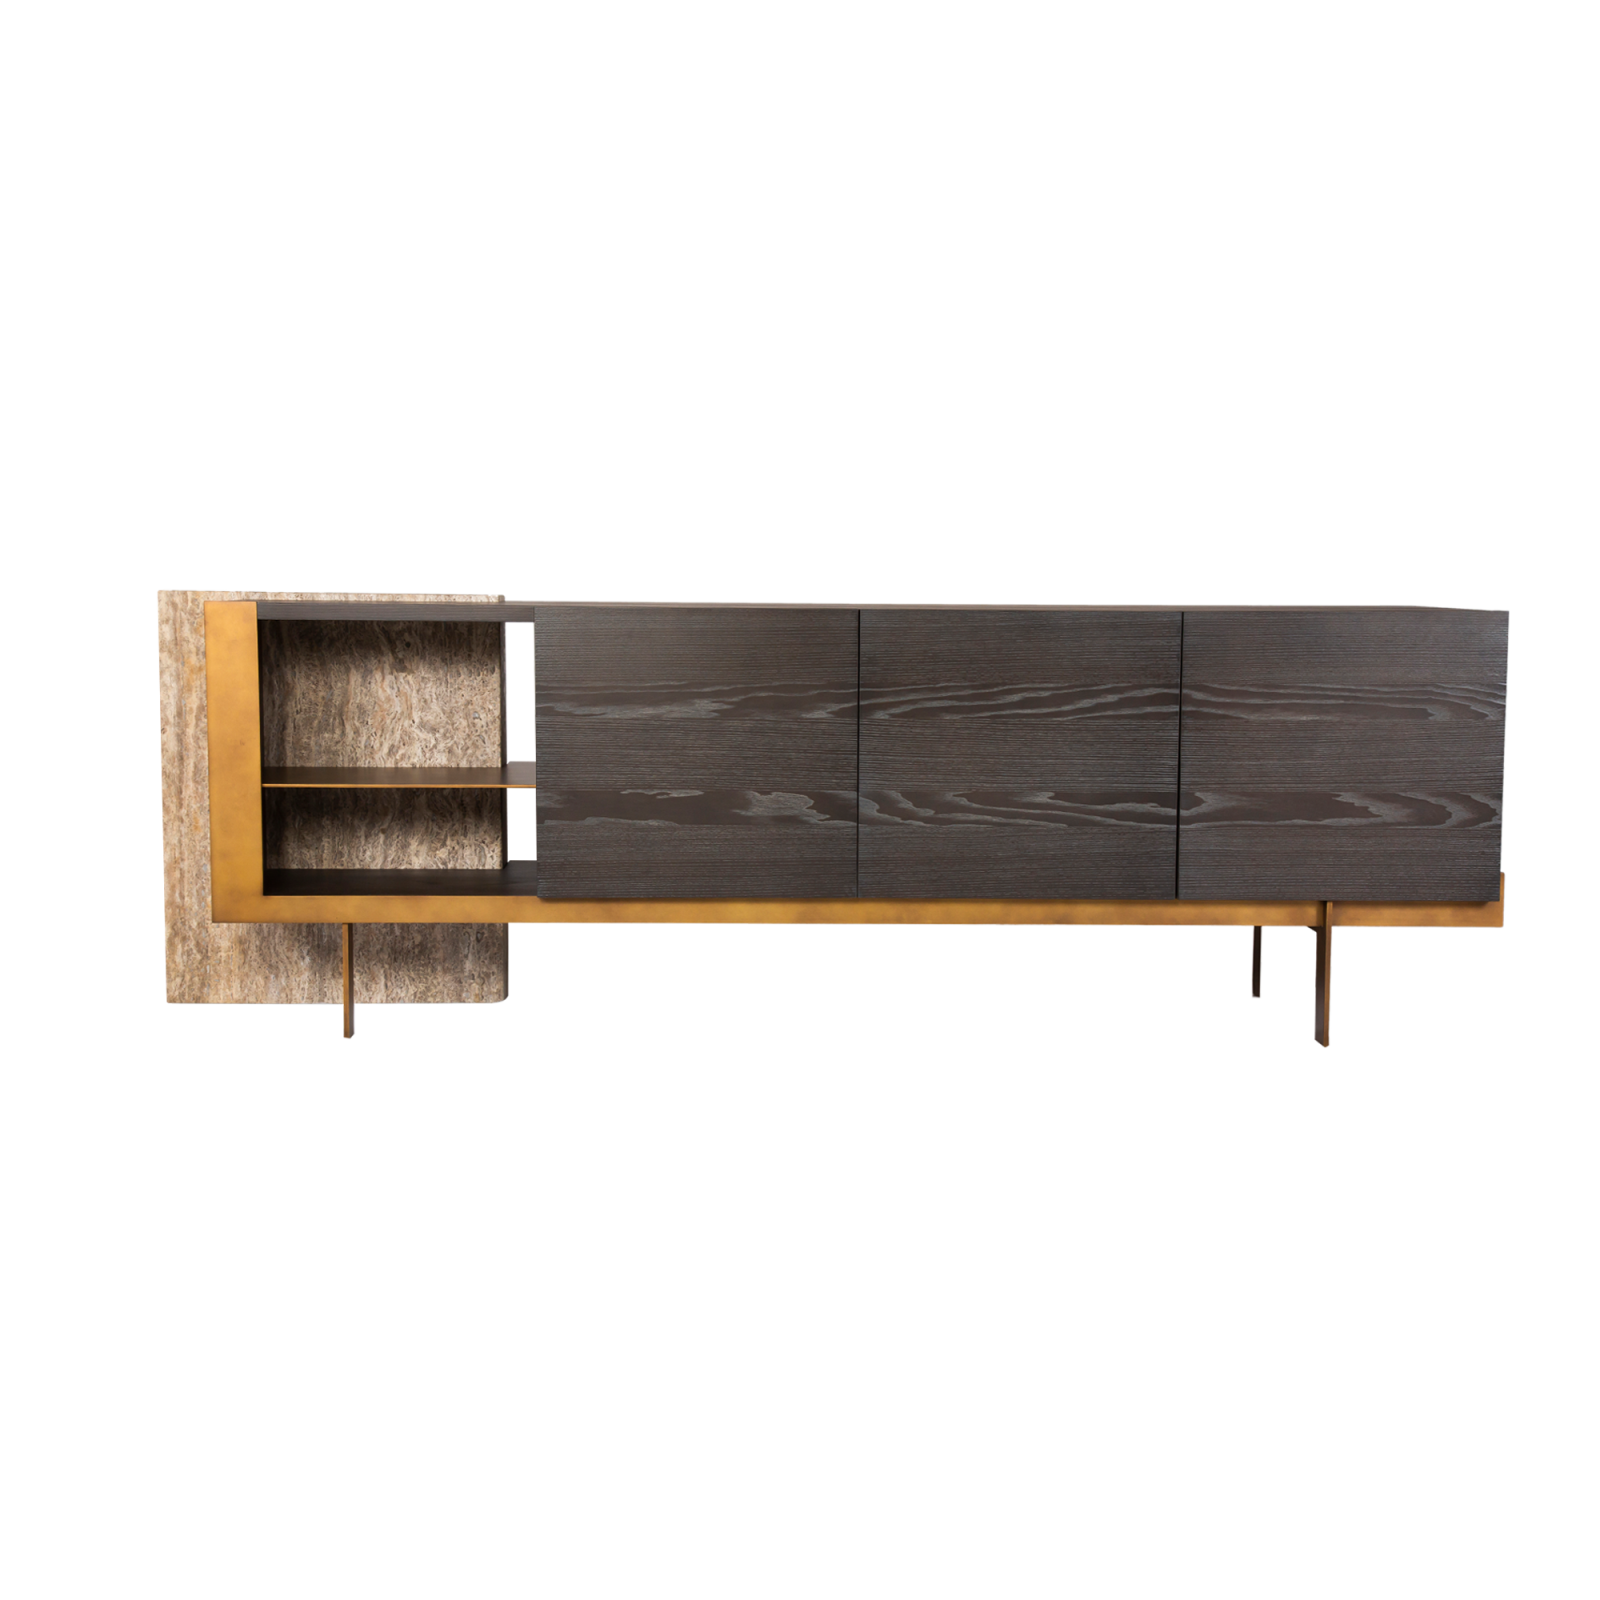 Inca sideboard is made from aged brass, with travertine marble standing on white background